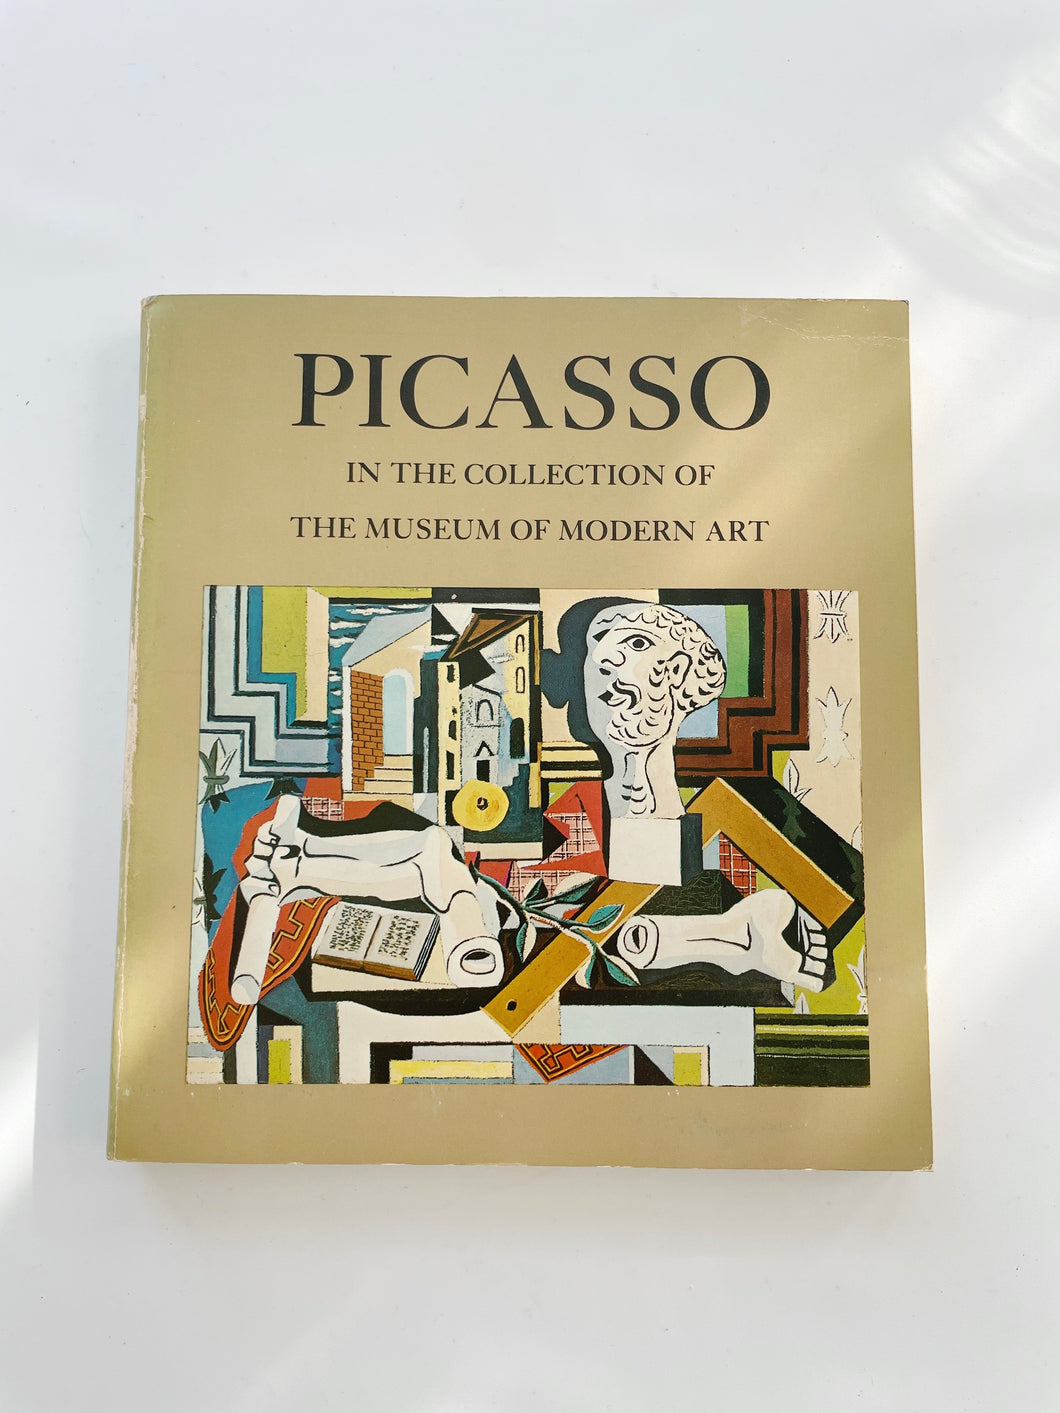 Picasso in the Collection of the Museum of Modern Art